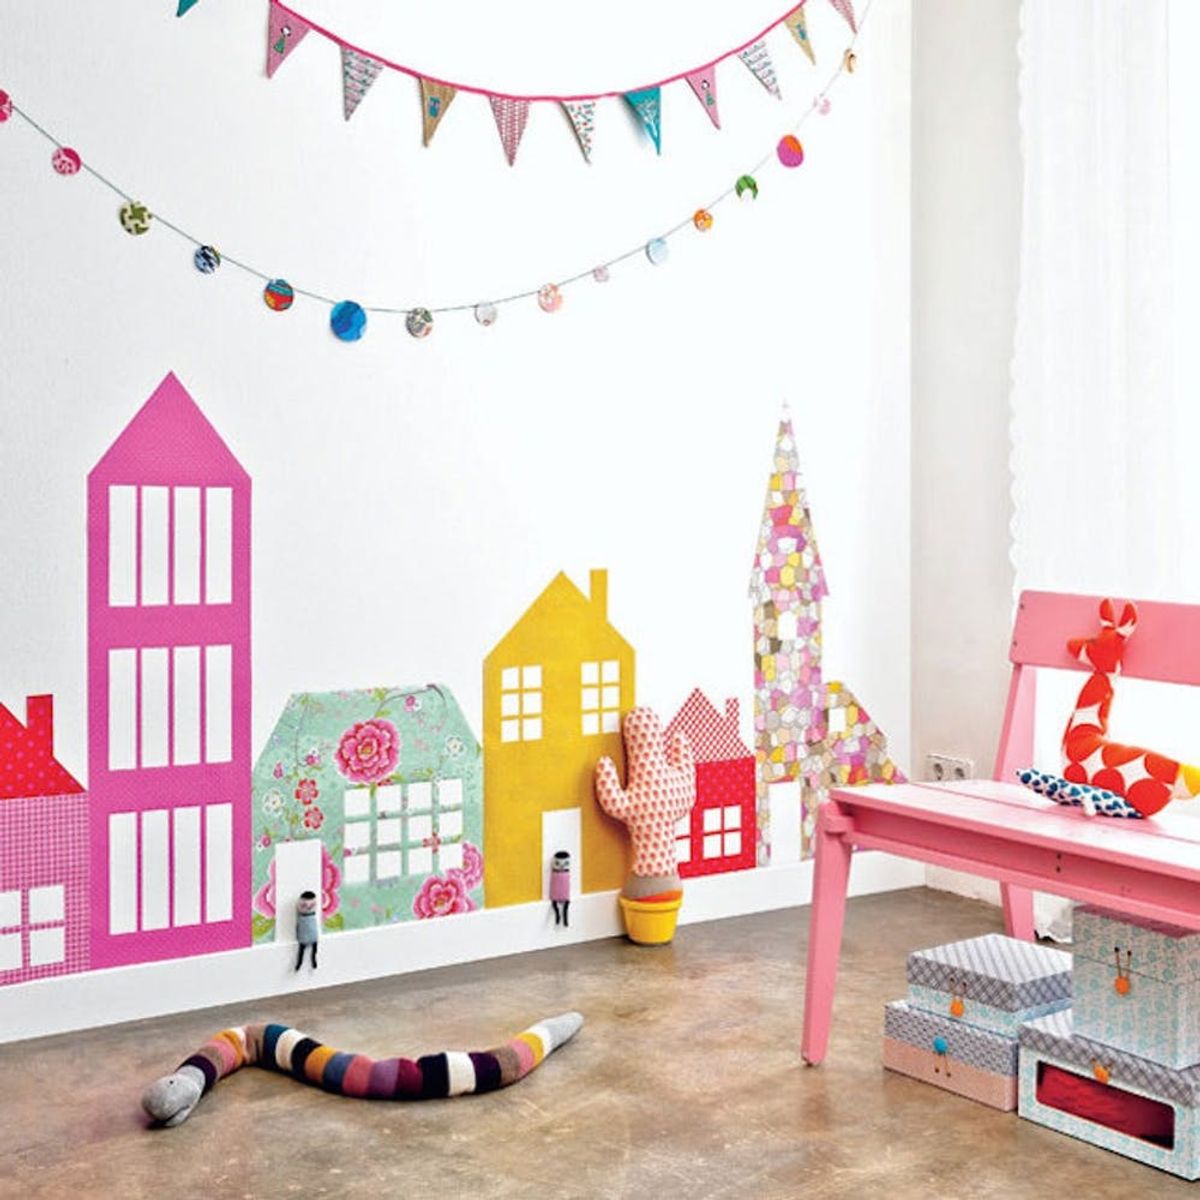 The 14 Most Creative Kids’ Rooms You’ll Ever See